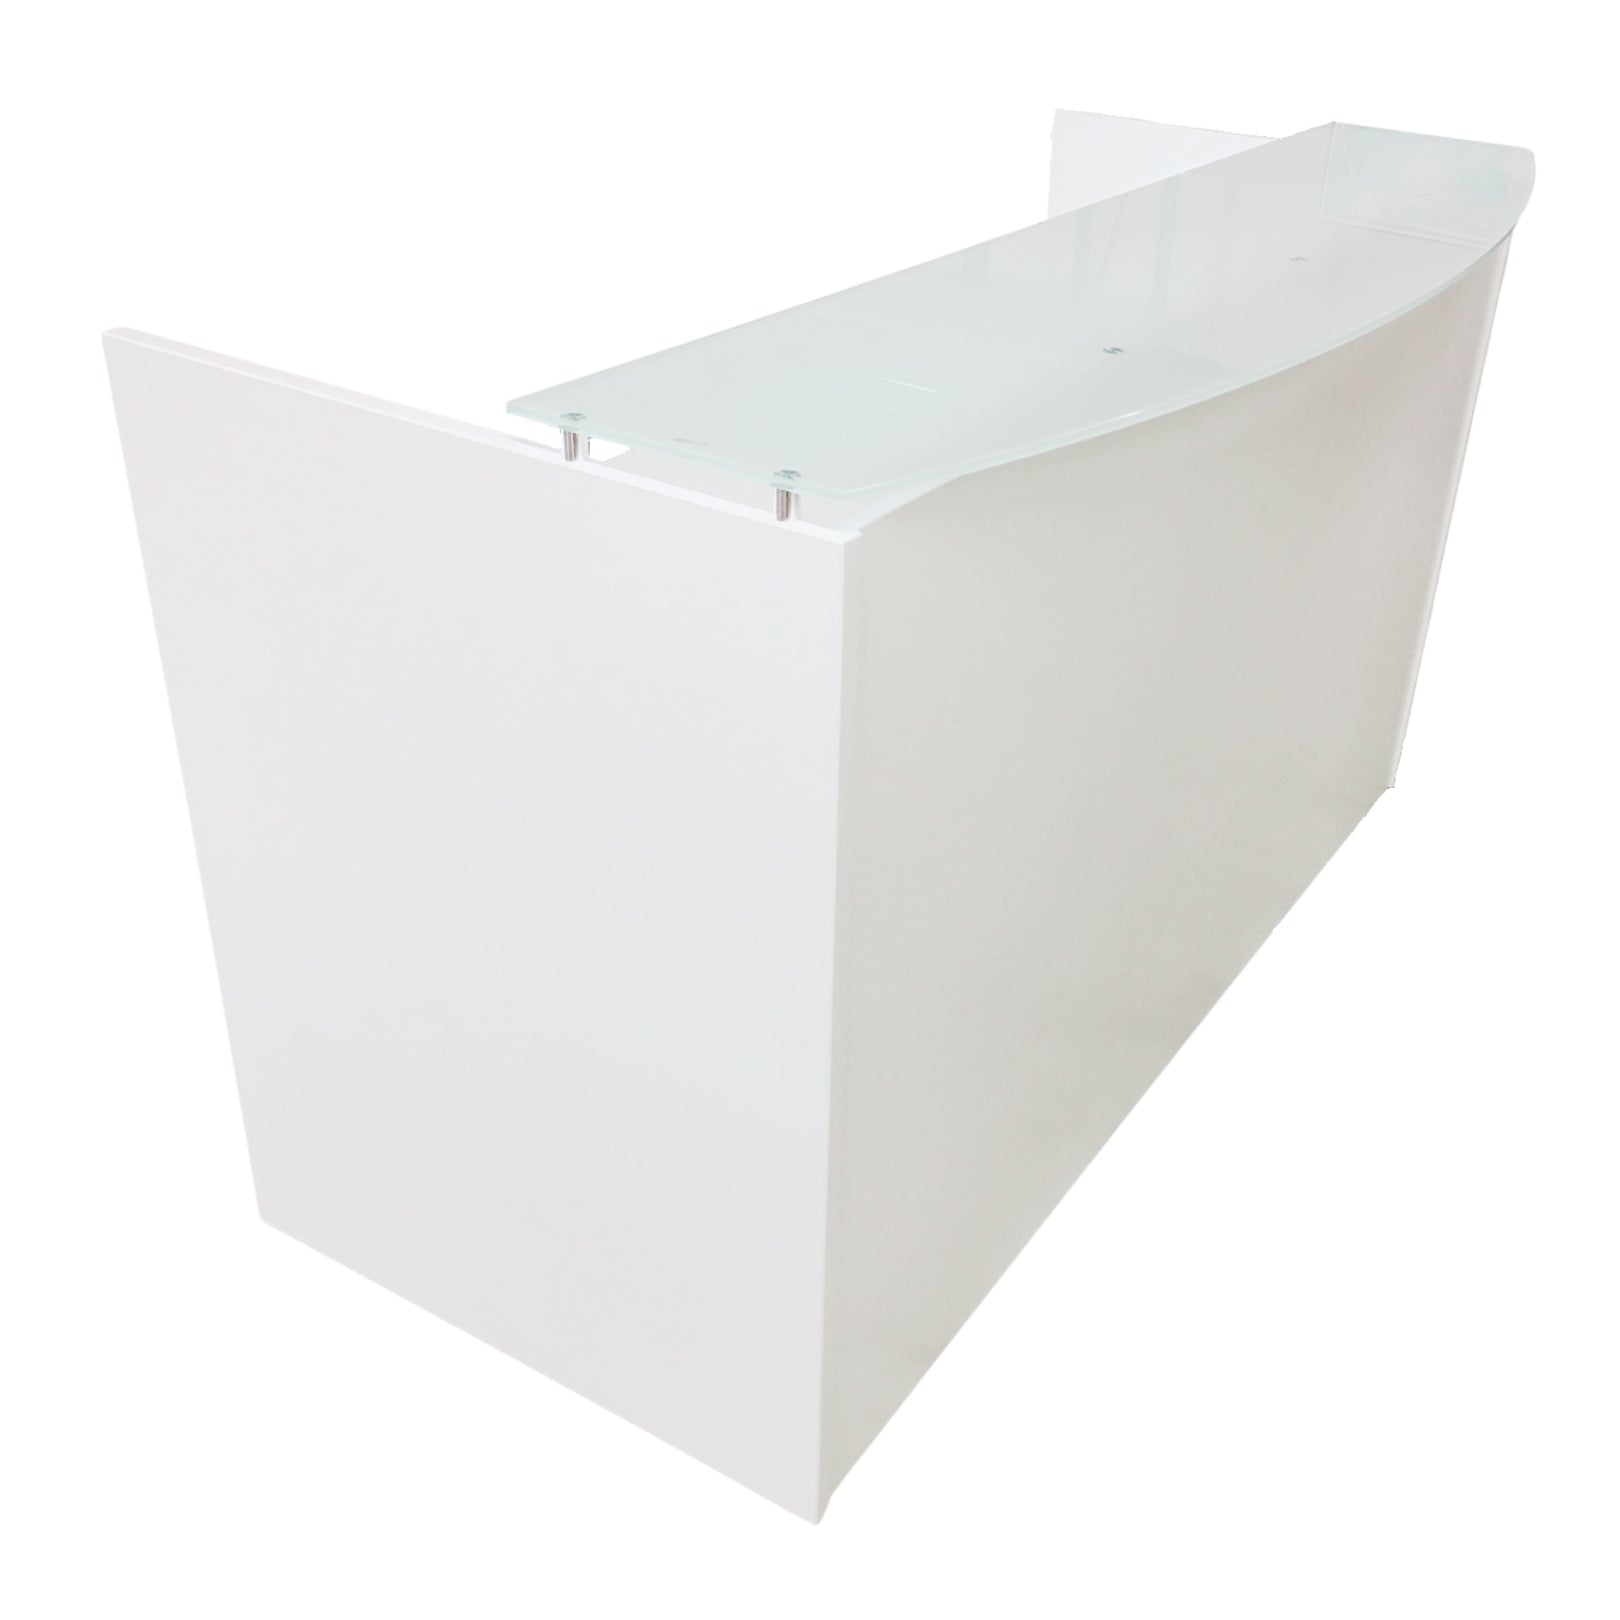 Sheridan Reception Desk Shell with Ultra White Glass Floating Transaction Counter, 72